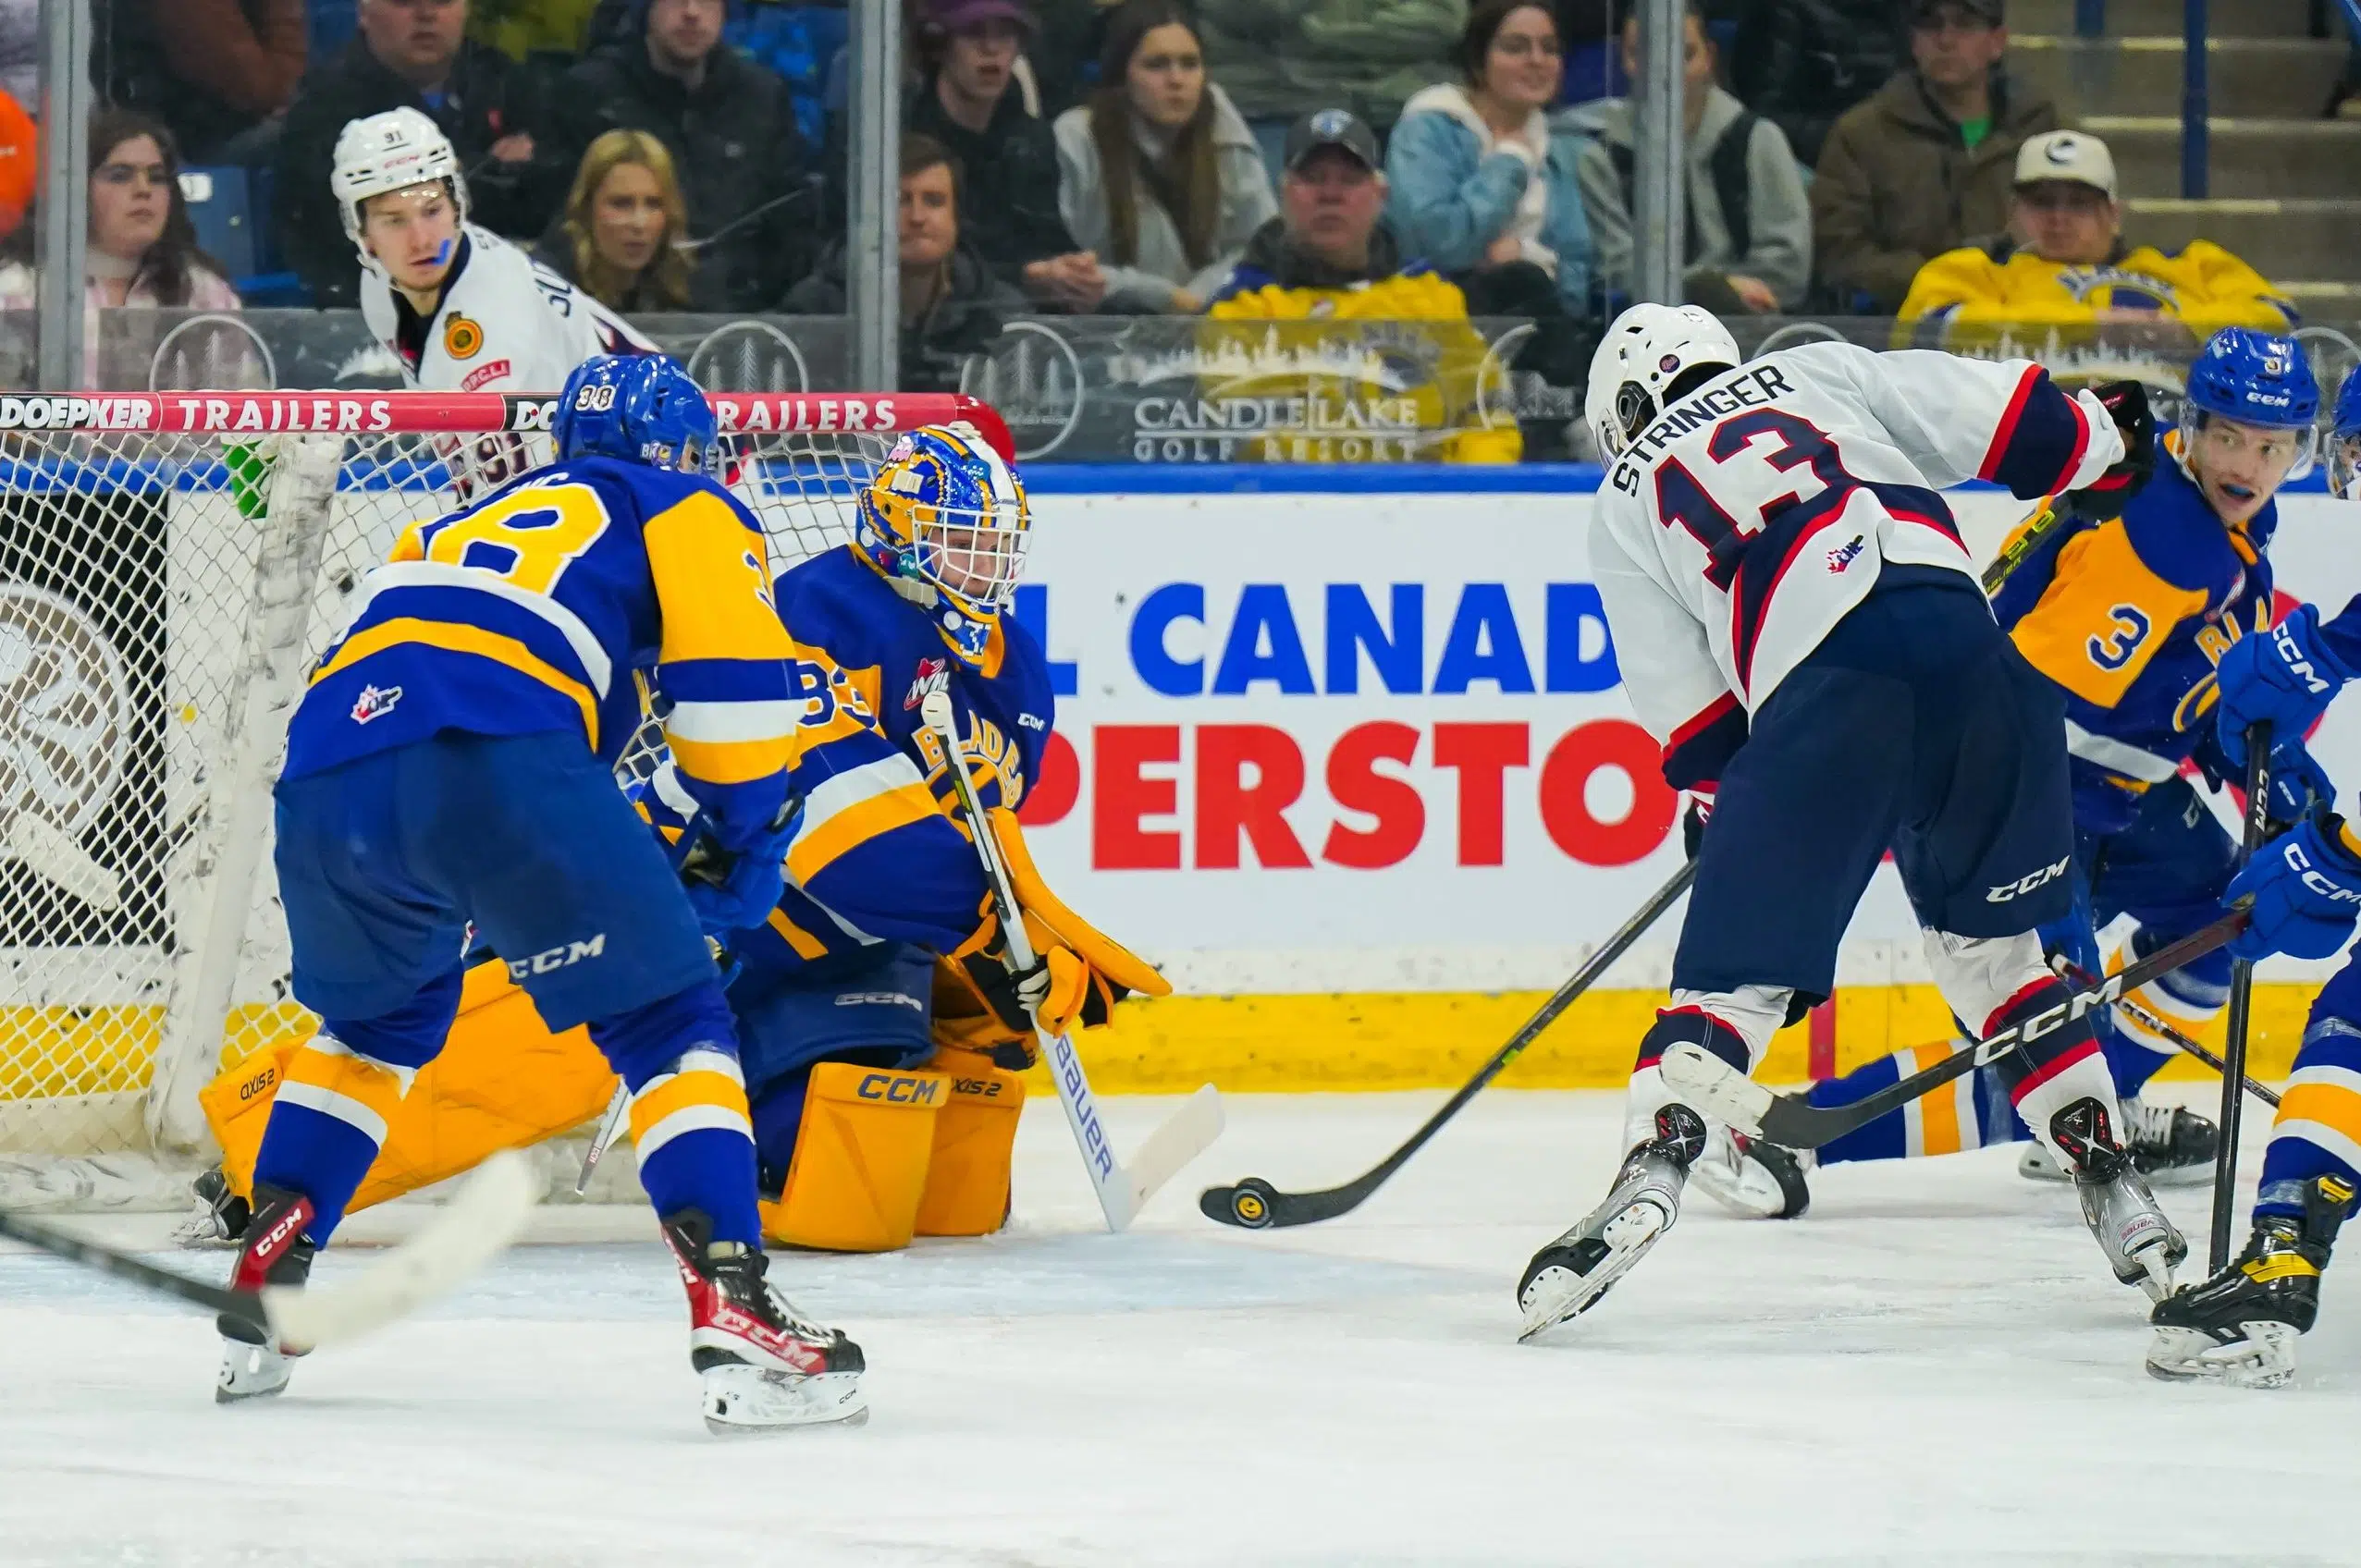 Pats take commanding first-round series lead versus Blades